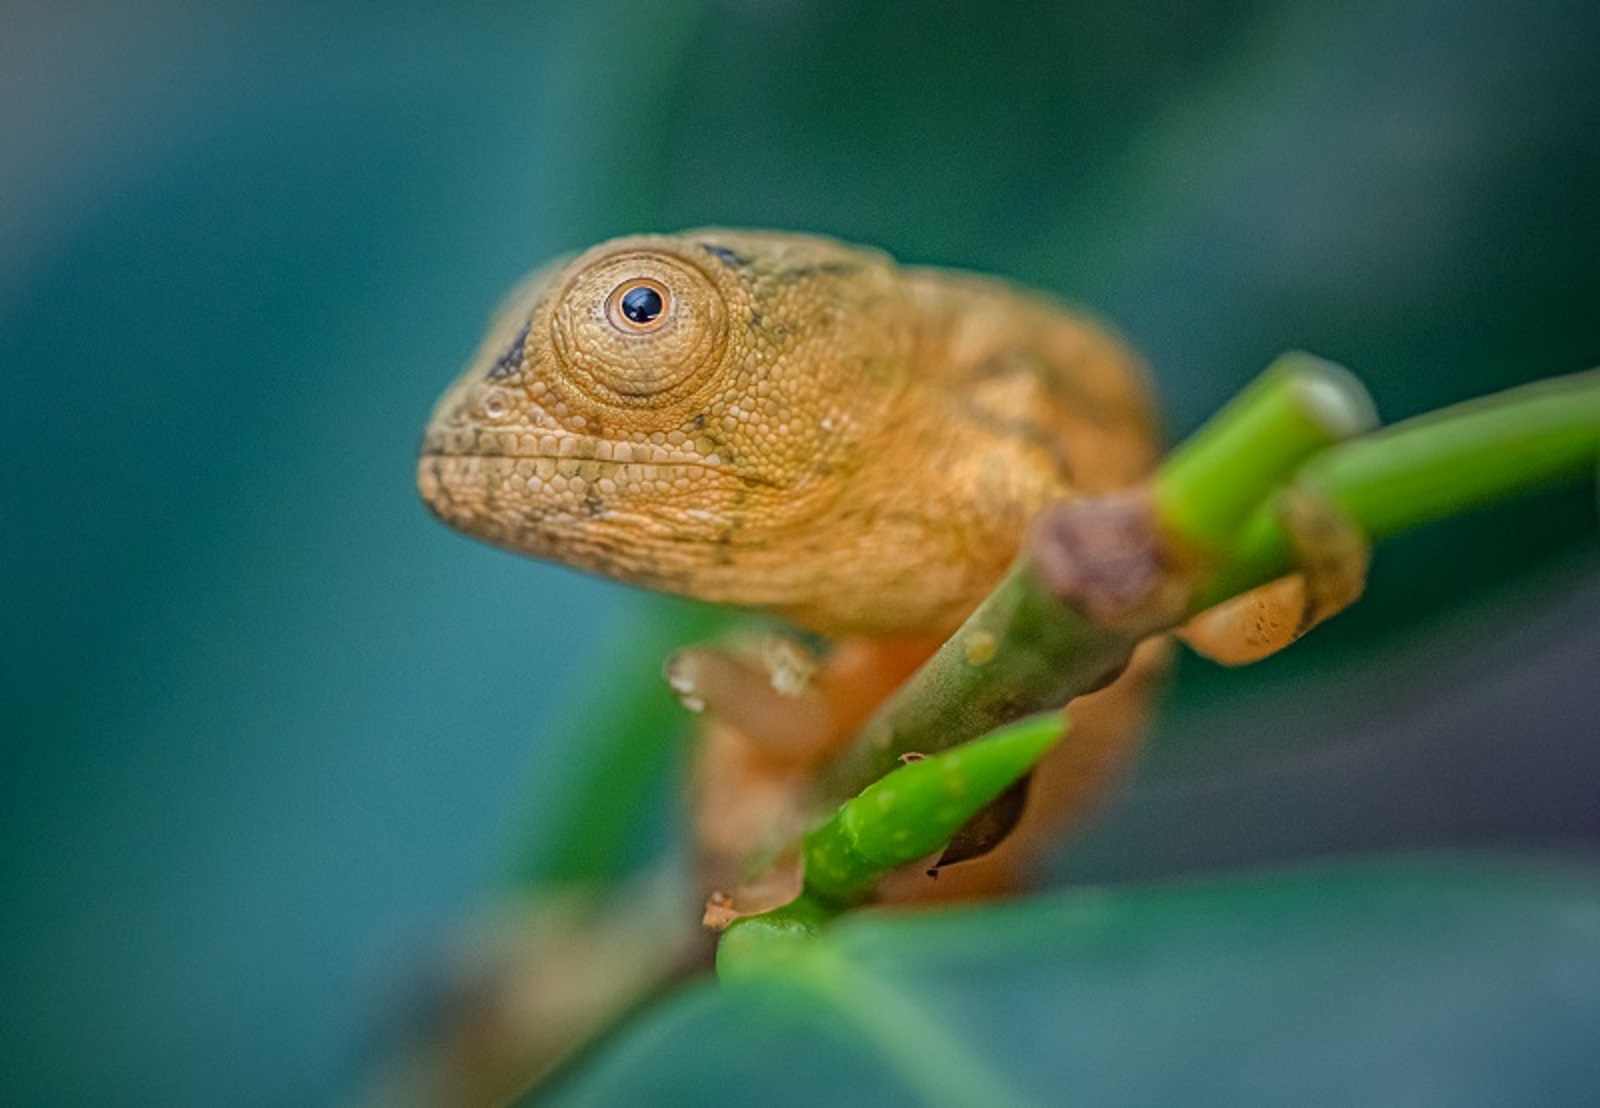 Reptile experts at Chester Zoo believe they have become the first zoo in the UK to breed rare Parson's chameleons